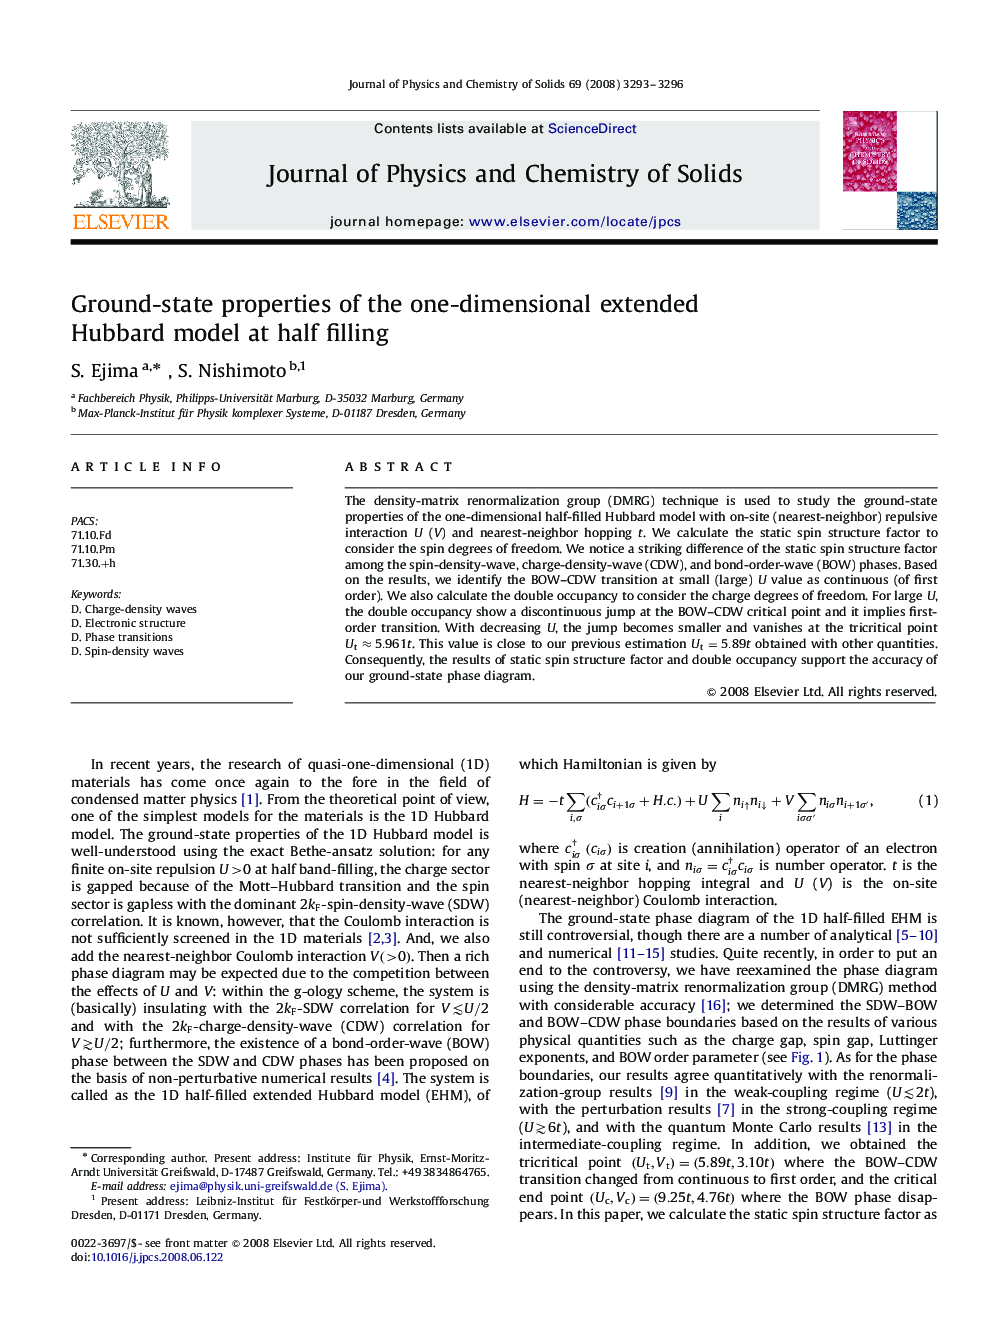 Ground-state properties of the one-dimensional extended Hubbard model at half filling